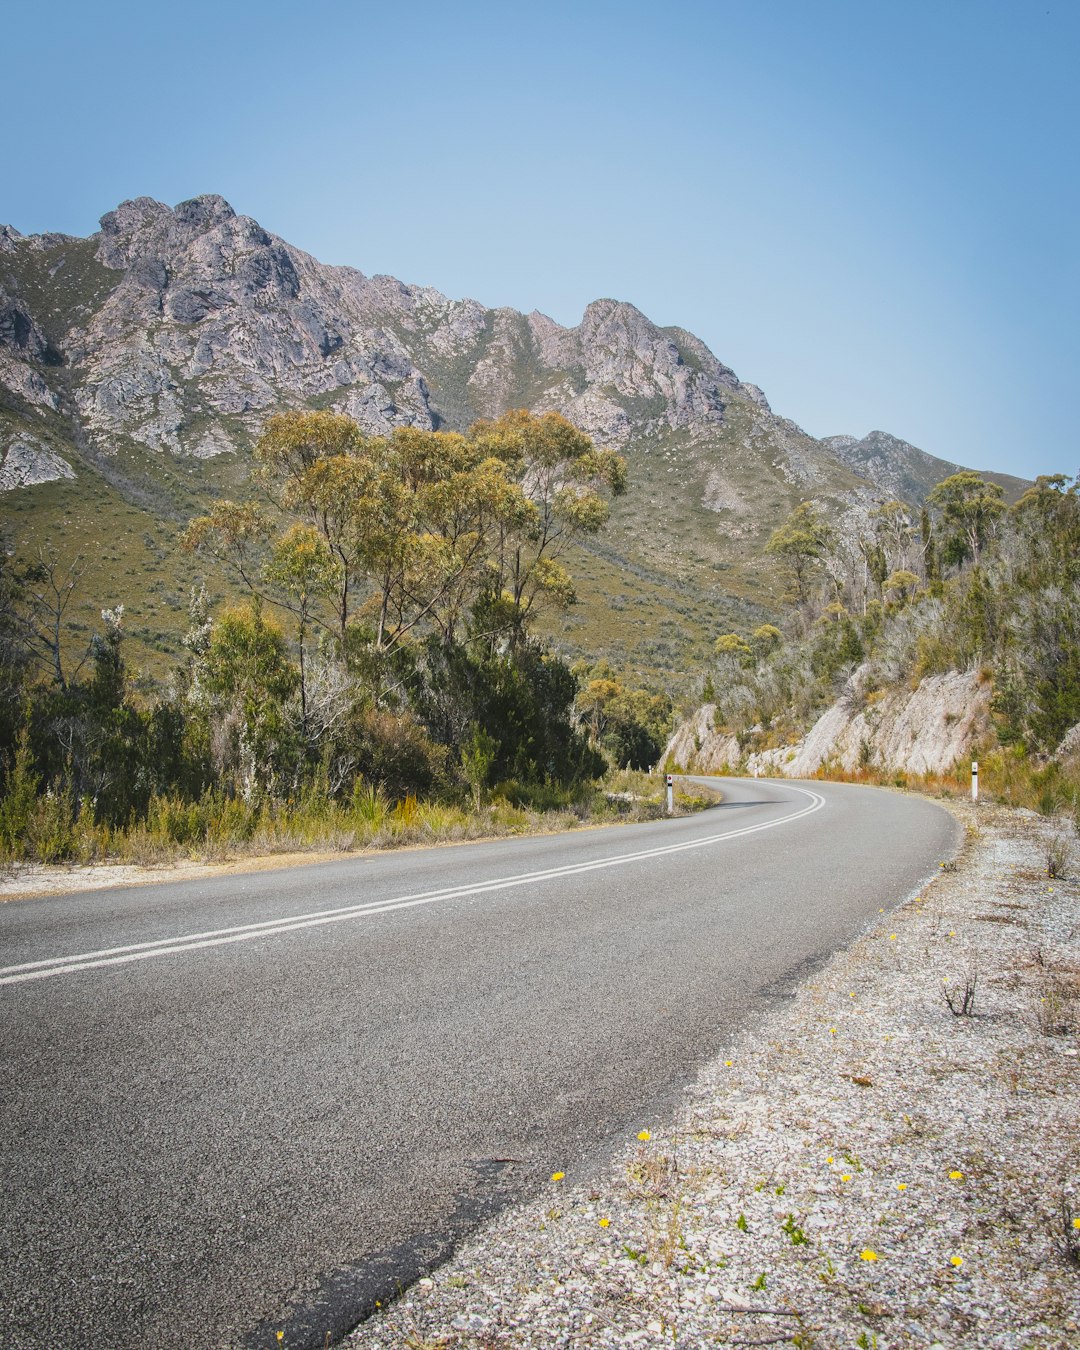 travelers stories about Mountain pass in Southwest National Park, Australia